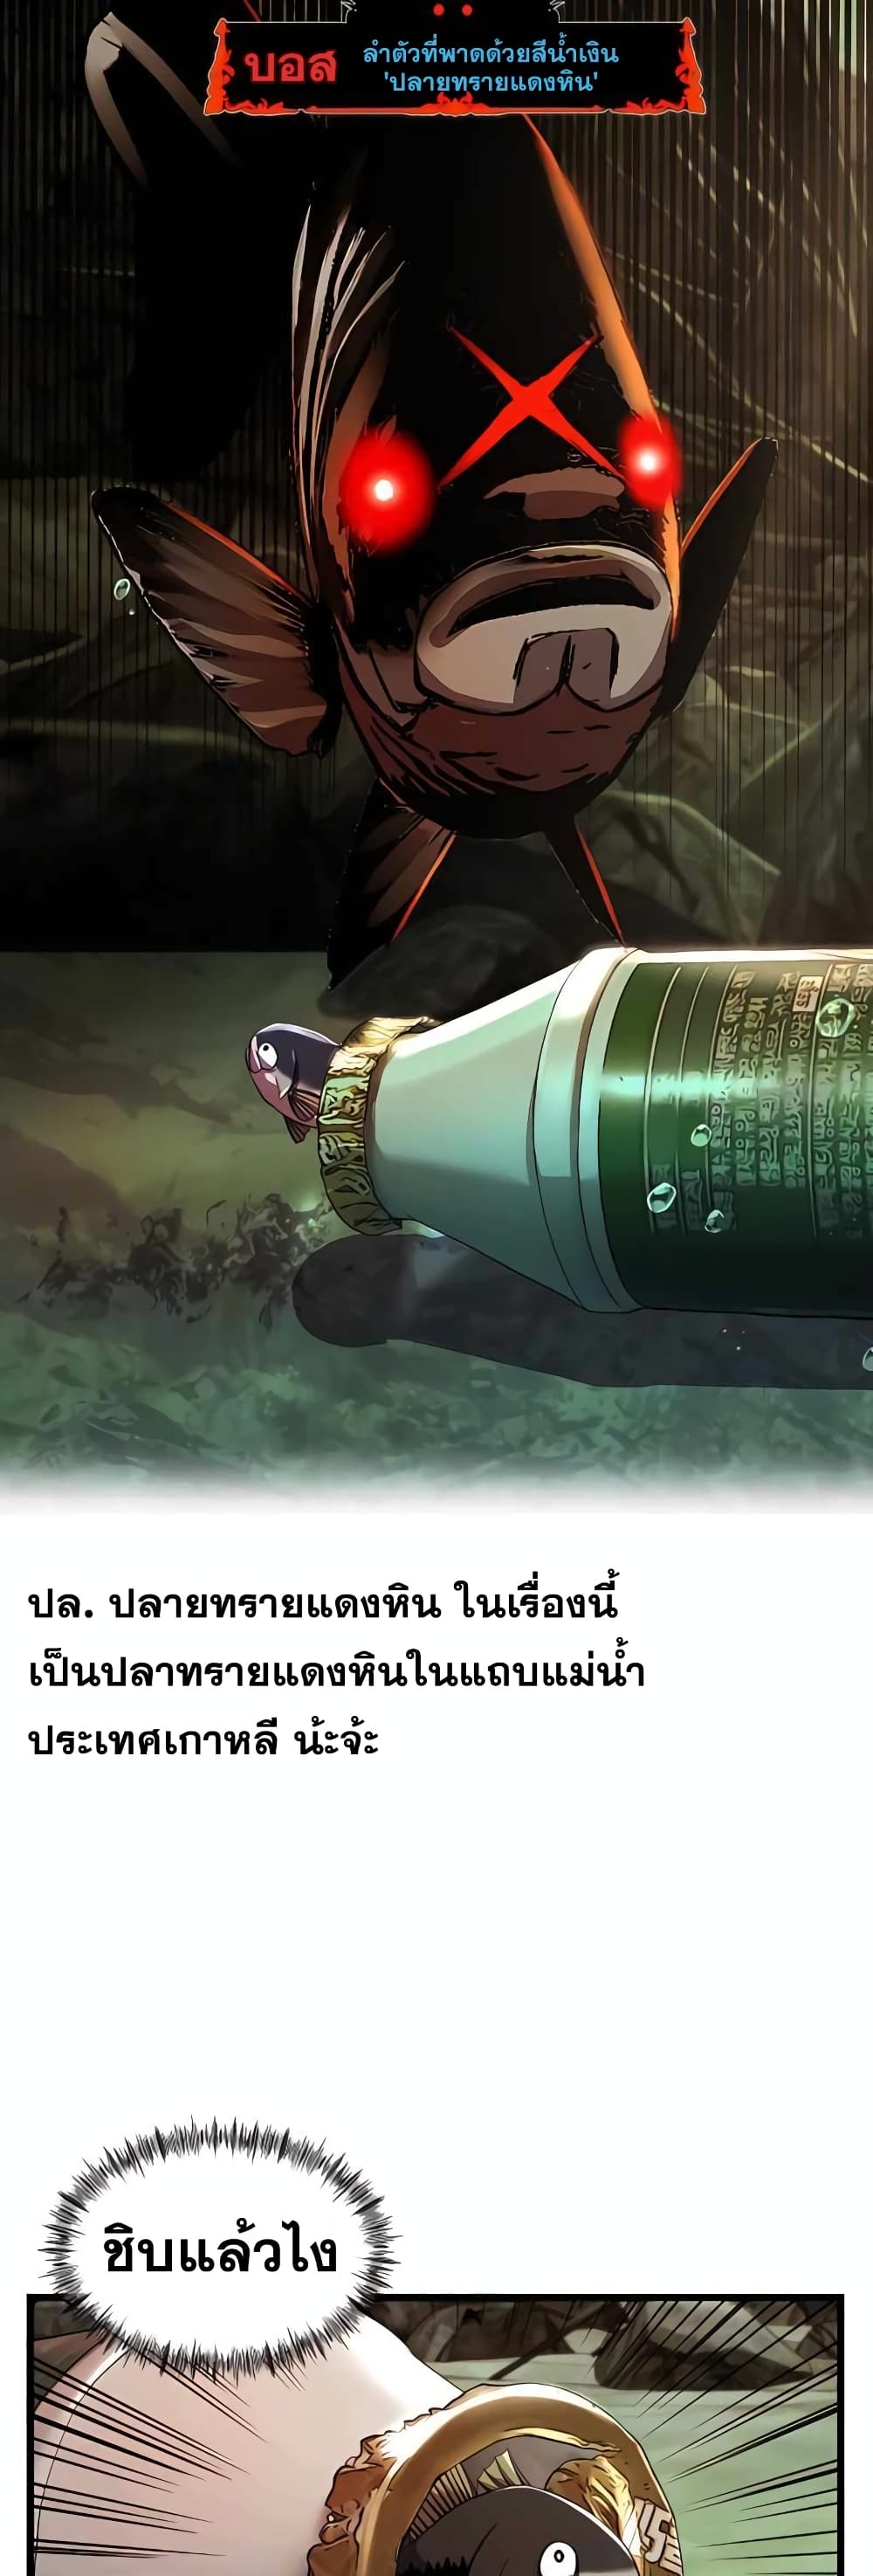 Surviving As a Fish ตอนที่ 7 (6)